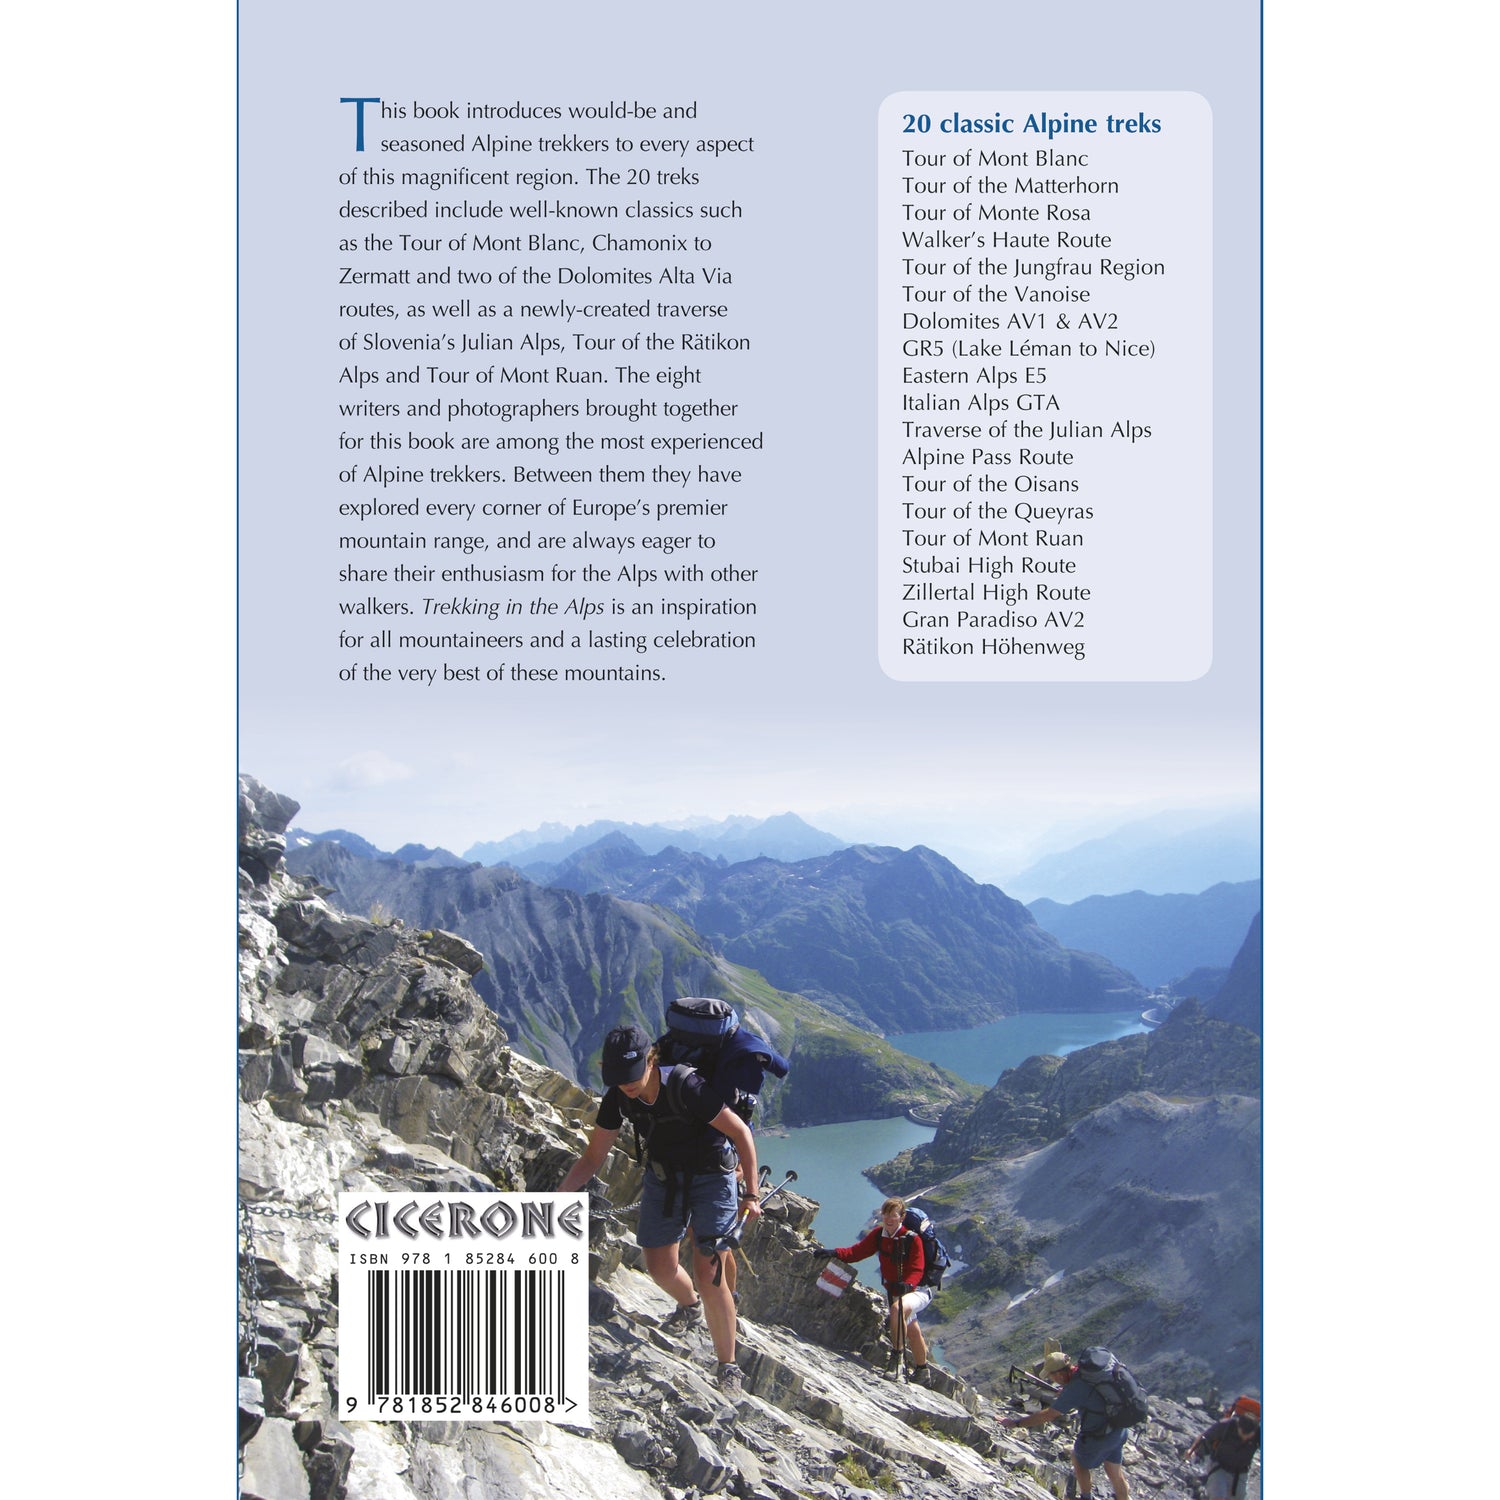 Trekking in the Alps Guidebook | Backcountry Books